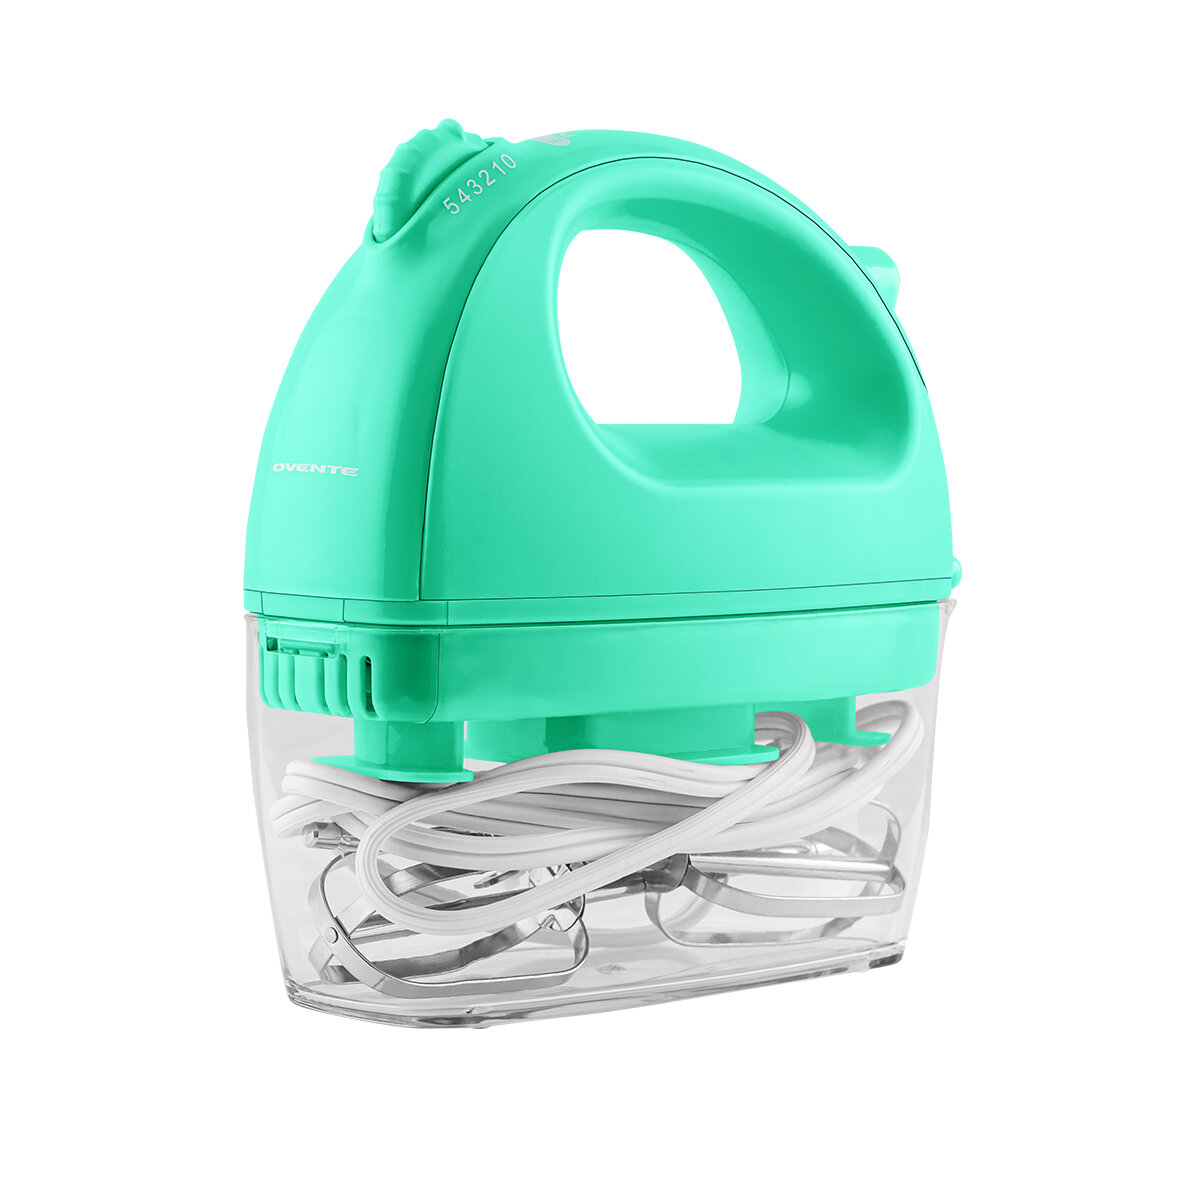 OVENTE 5-Speed Turquoise Portable Electric Hand Mixer with 2 Whisk